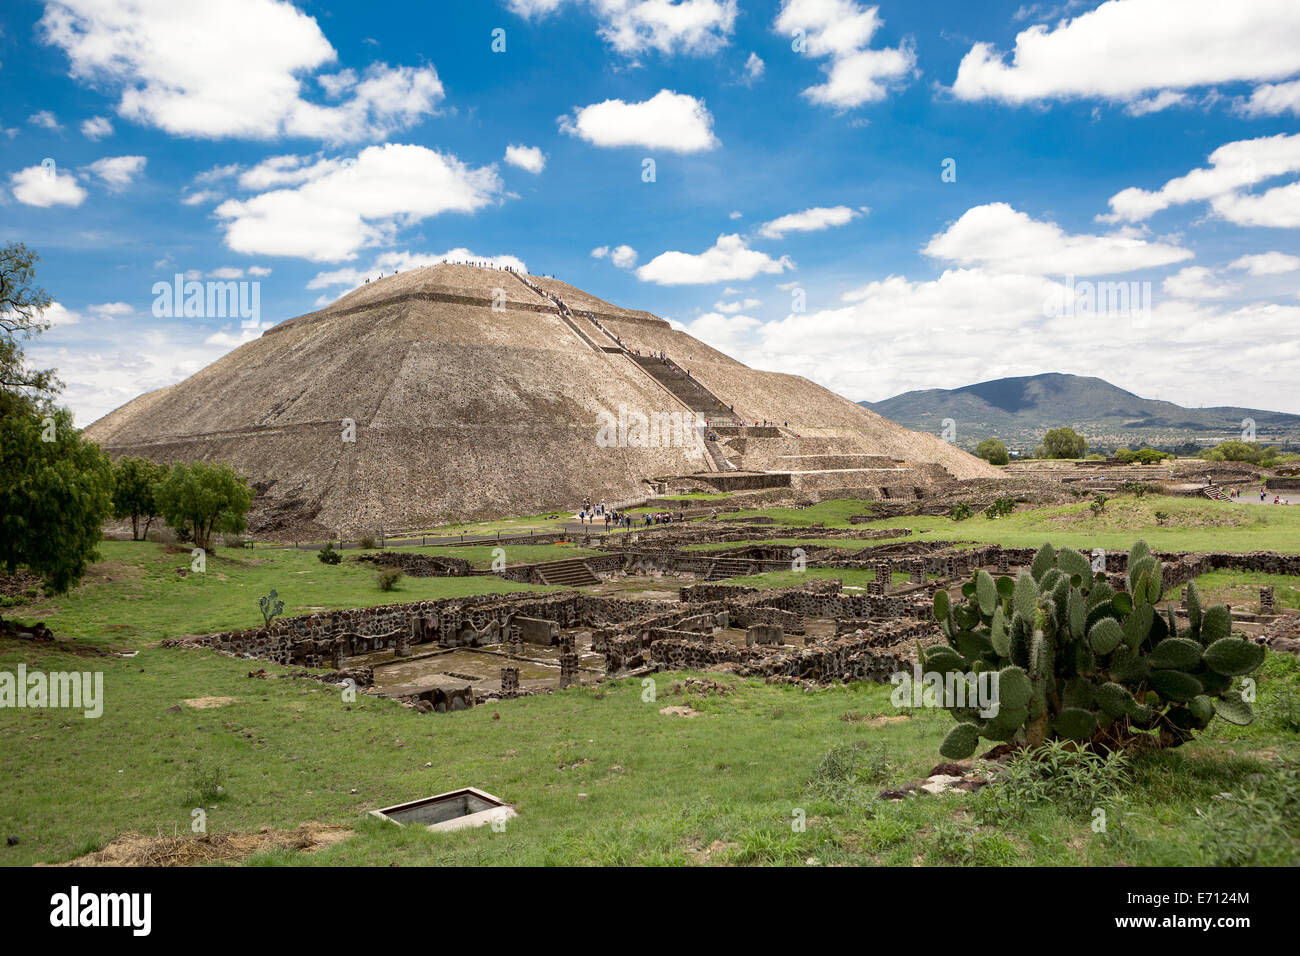 the pyramid of the sun, the world's third largest pyramid, in Teotihuacan, Mexico Stock Photo